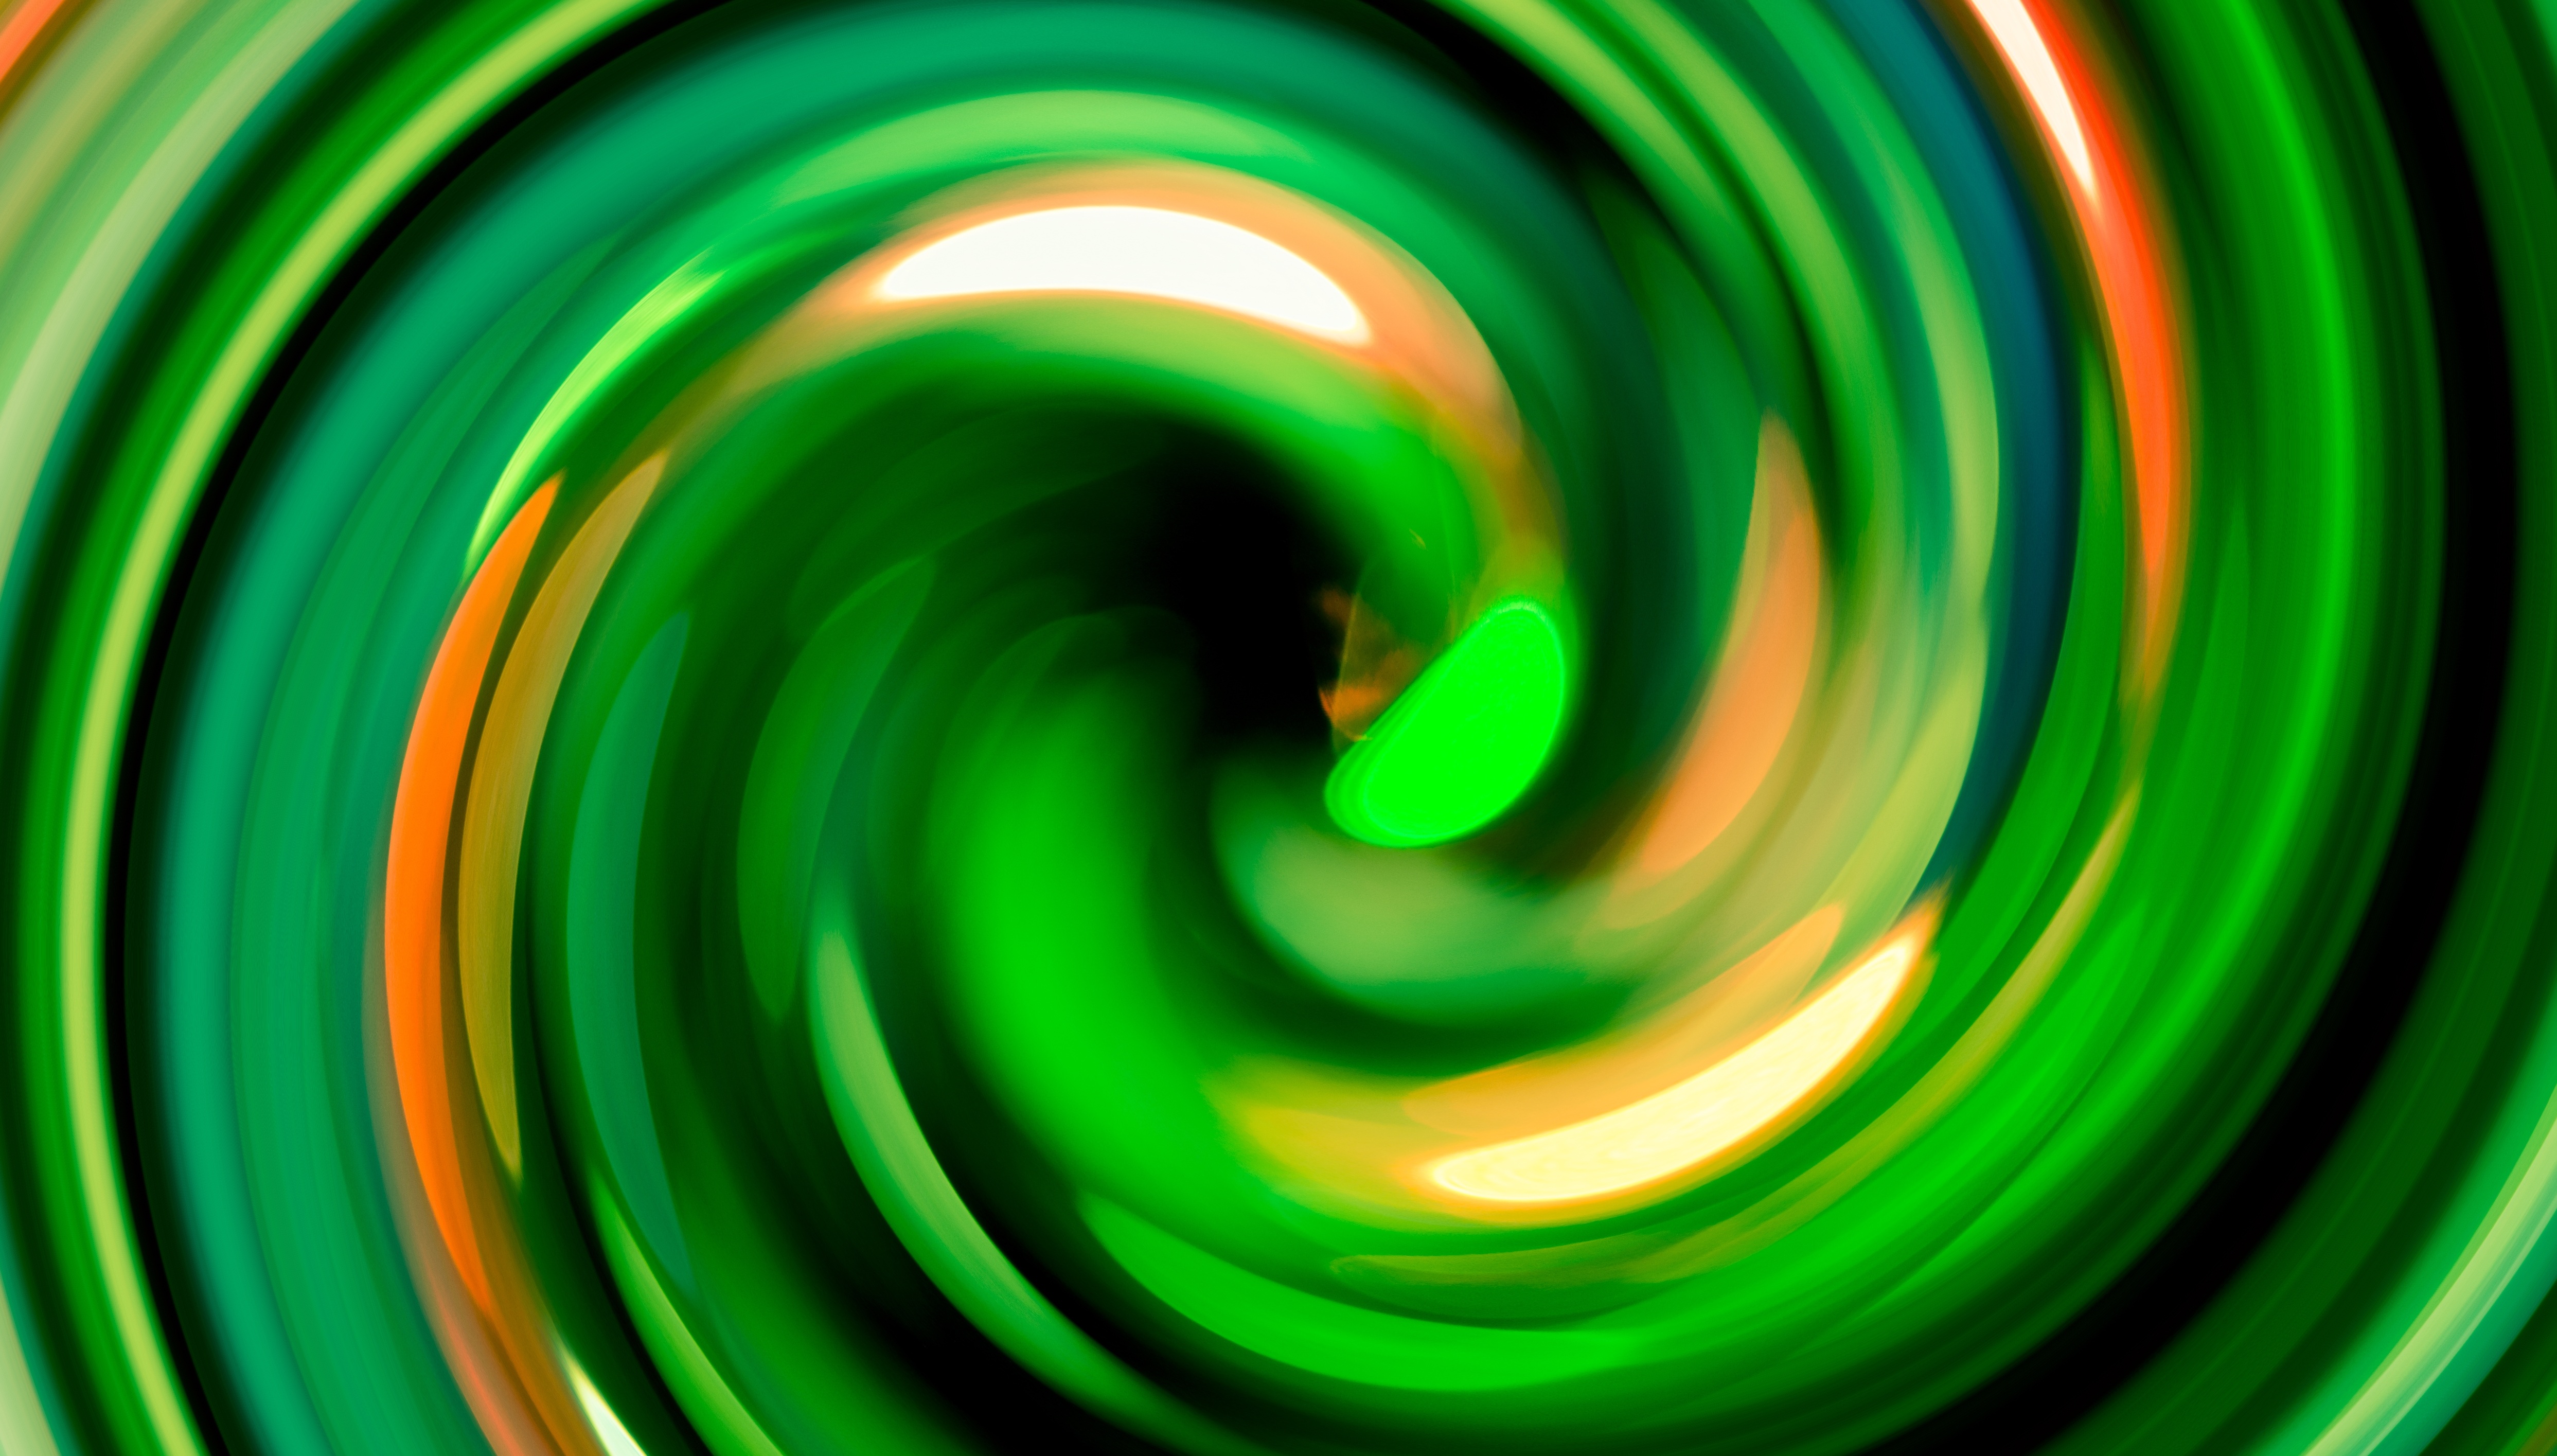 Background with green moving swirl free image download